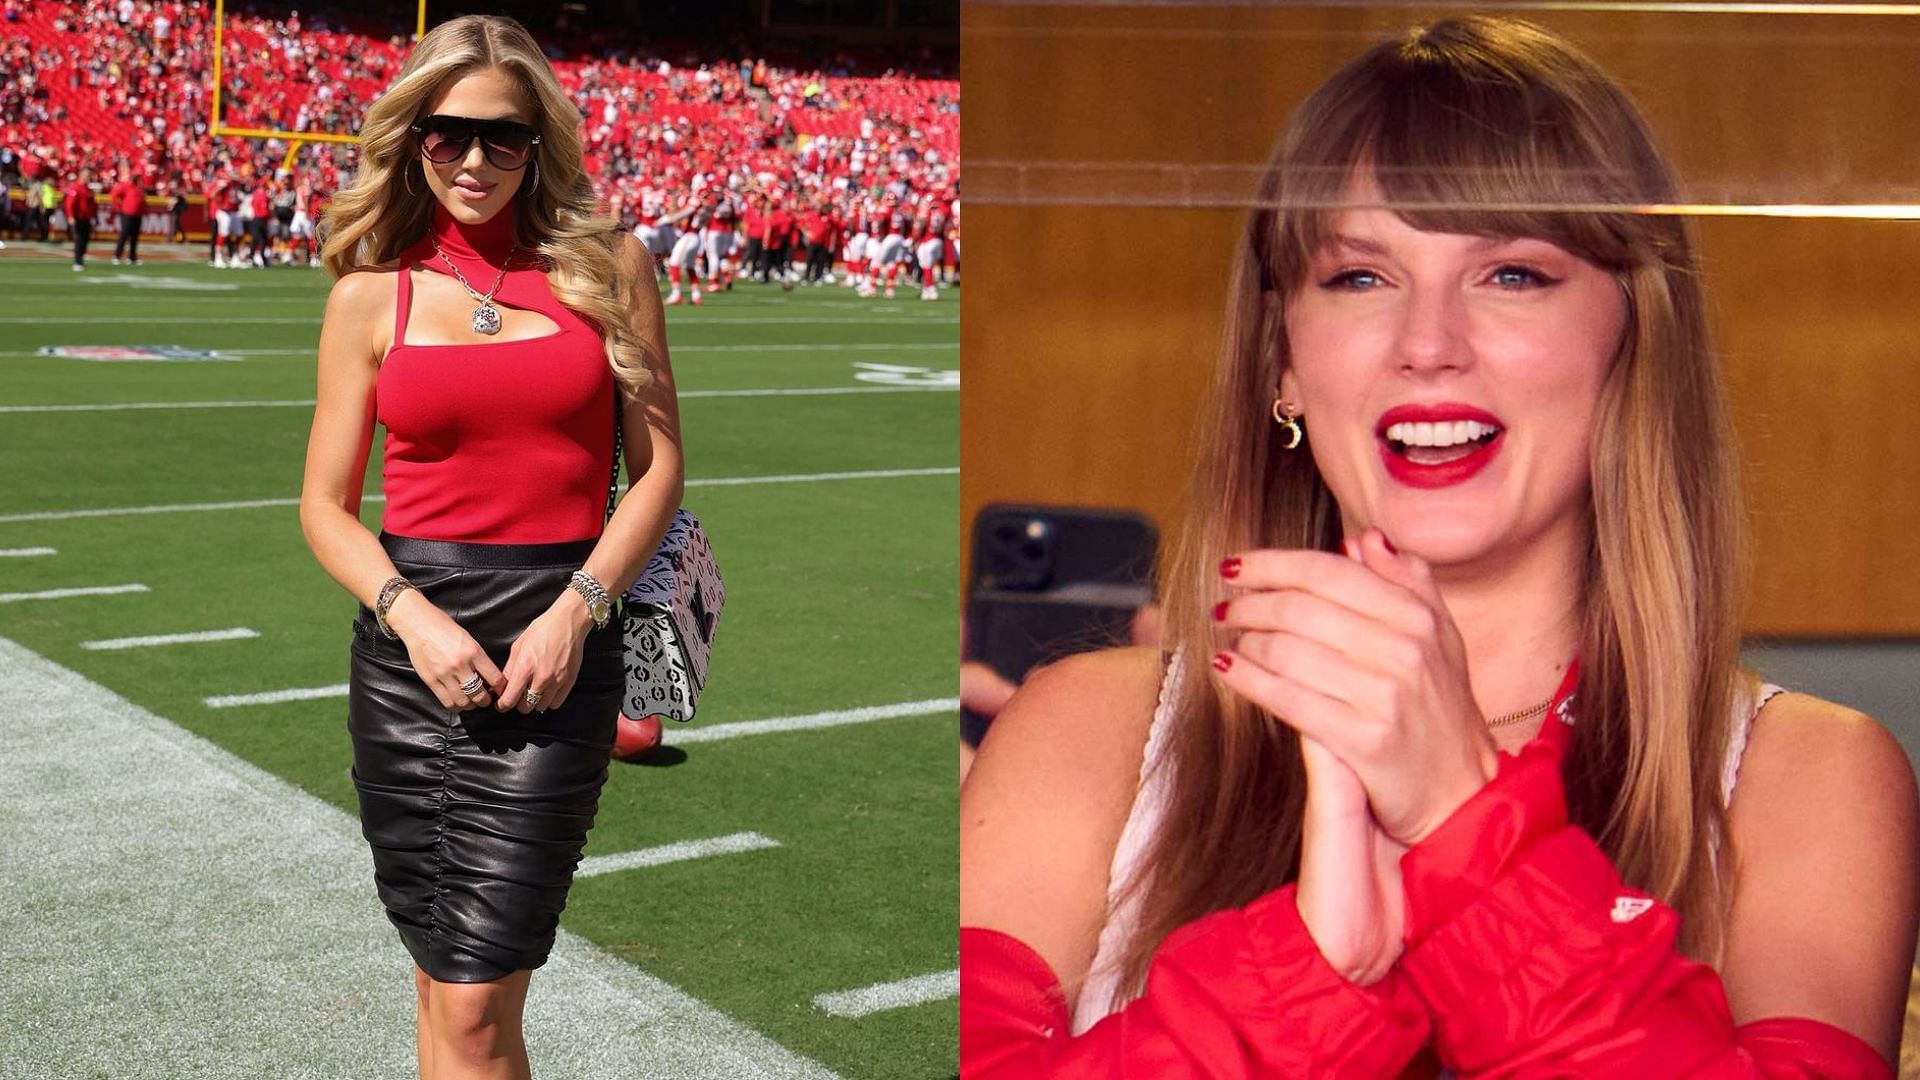 Even Gracie Hunt could not keep her eyes off from Taylor Swift at the Chiefs vs. Bears game.